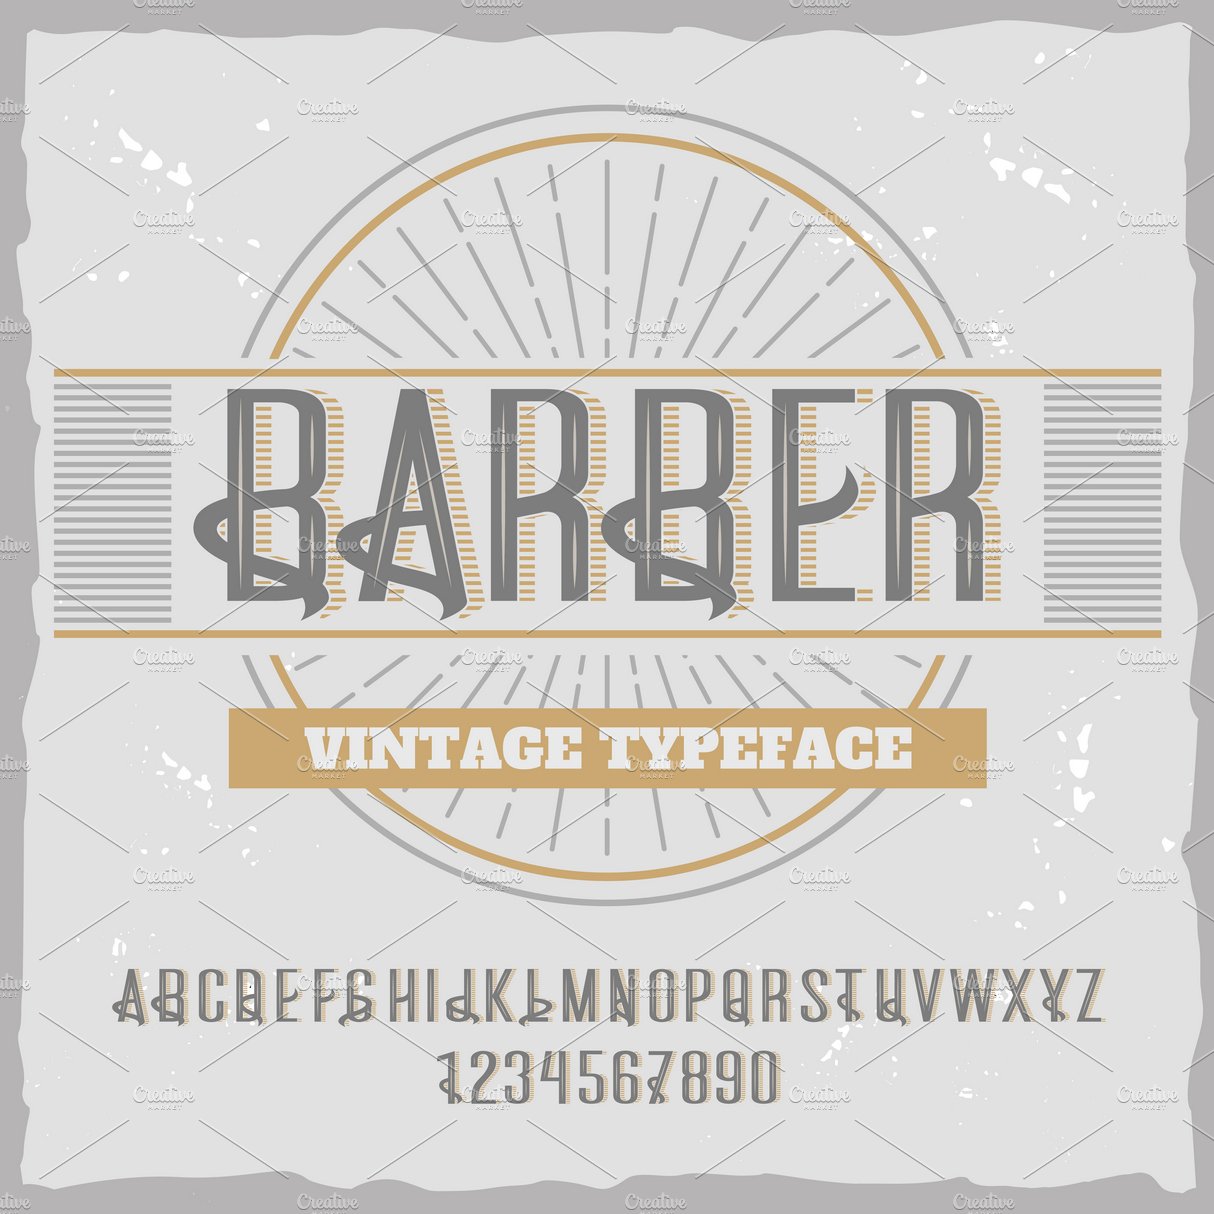 1117.a003.barber.s2 546